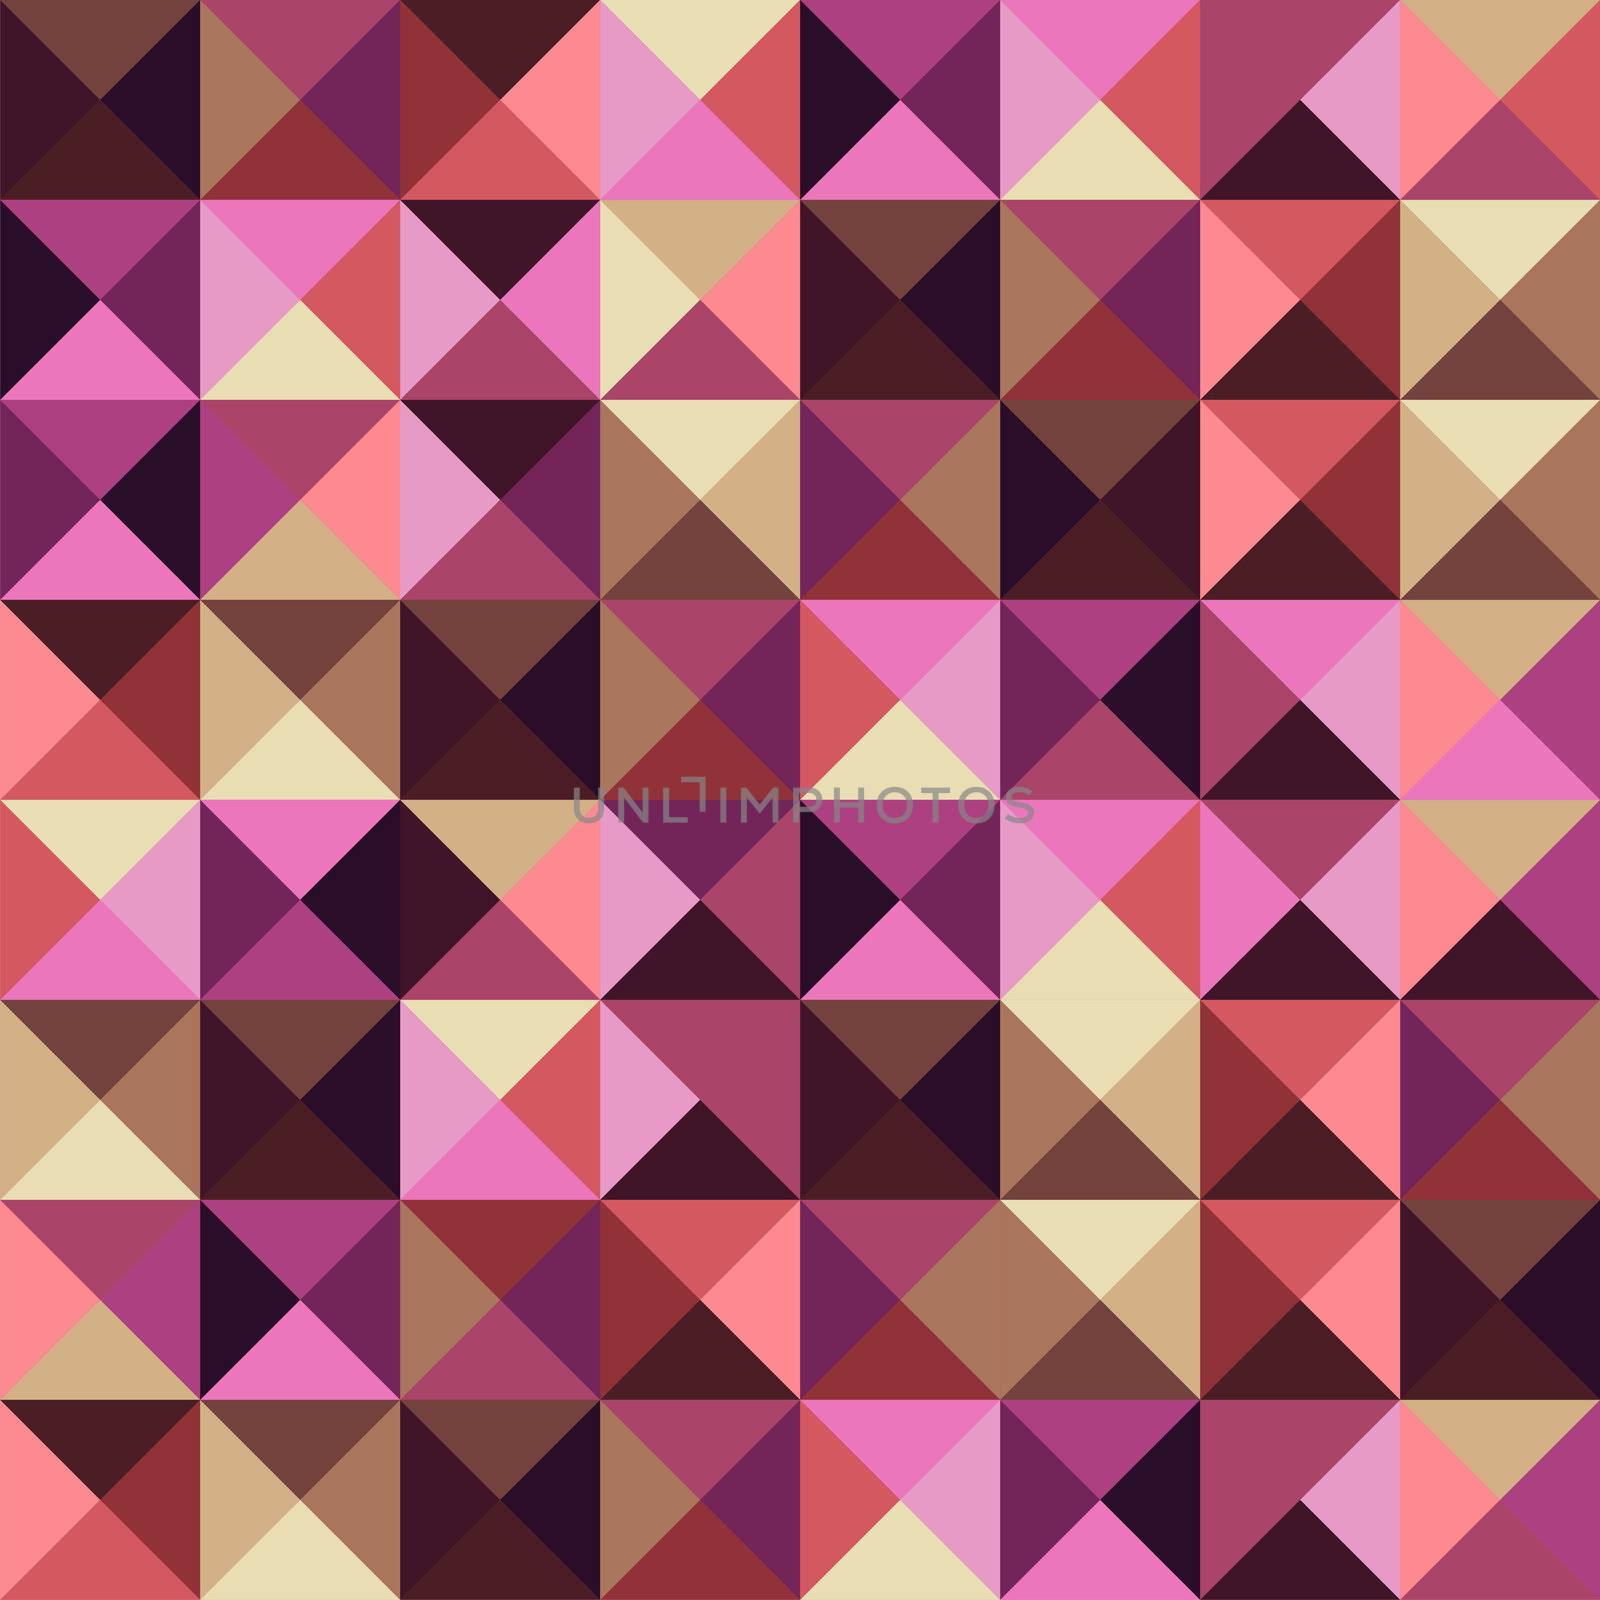 Abstract geometric vintage seamless pattern.